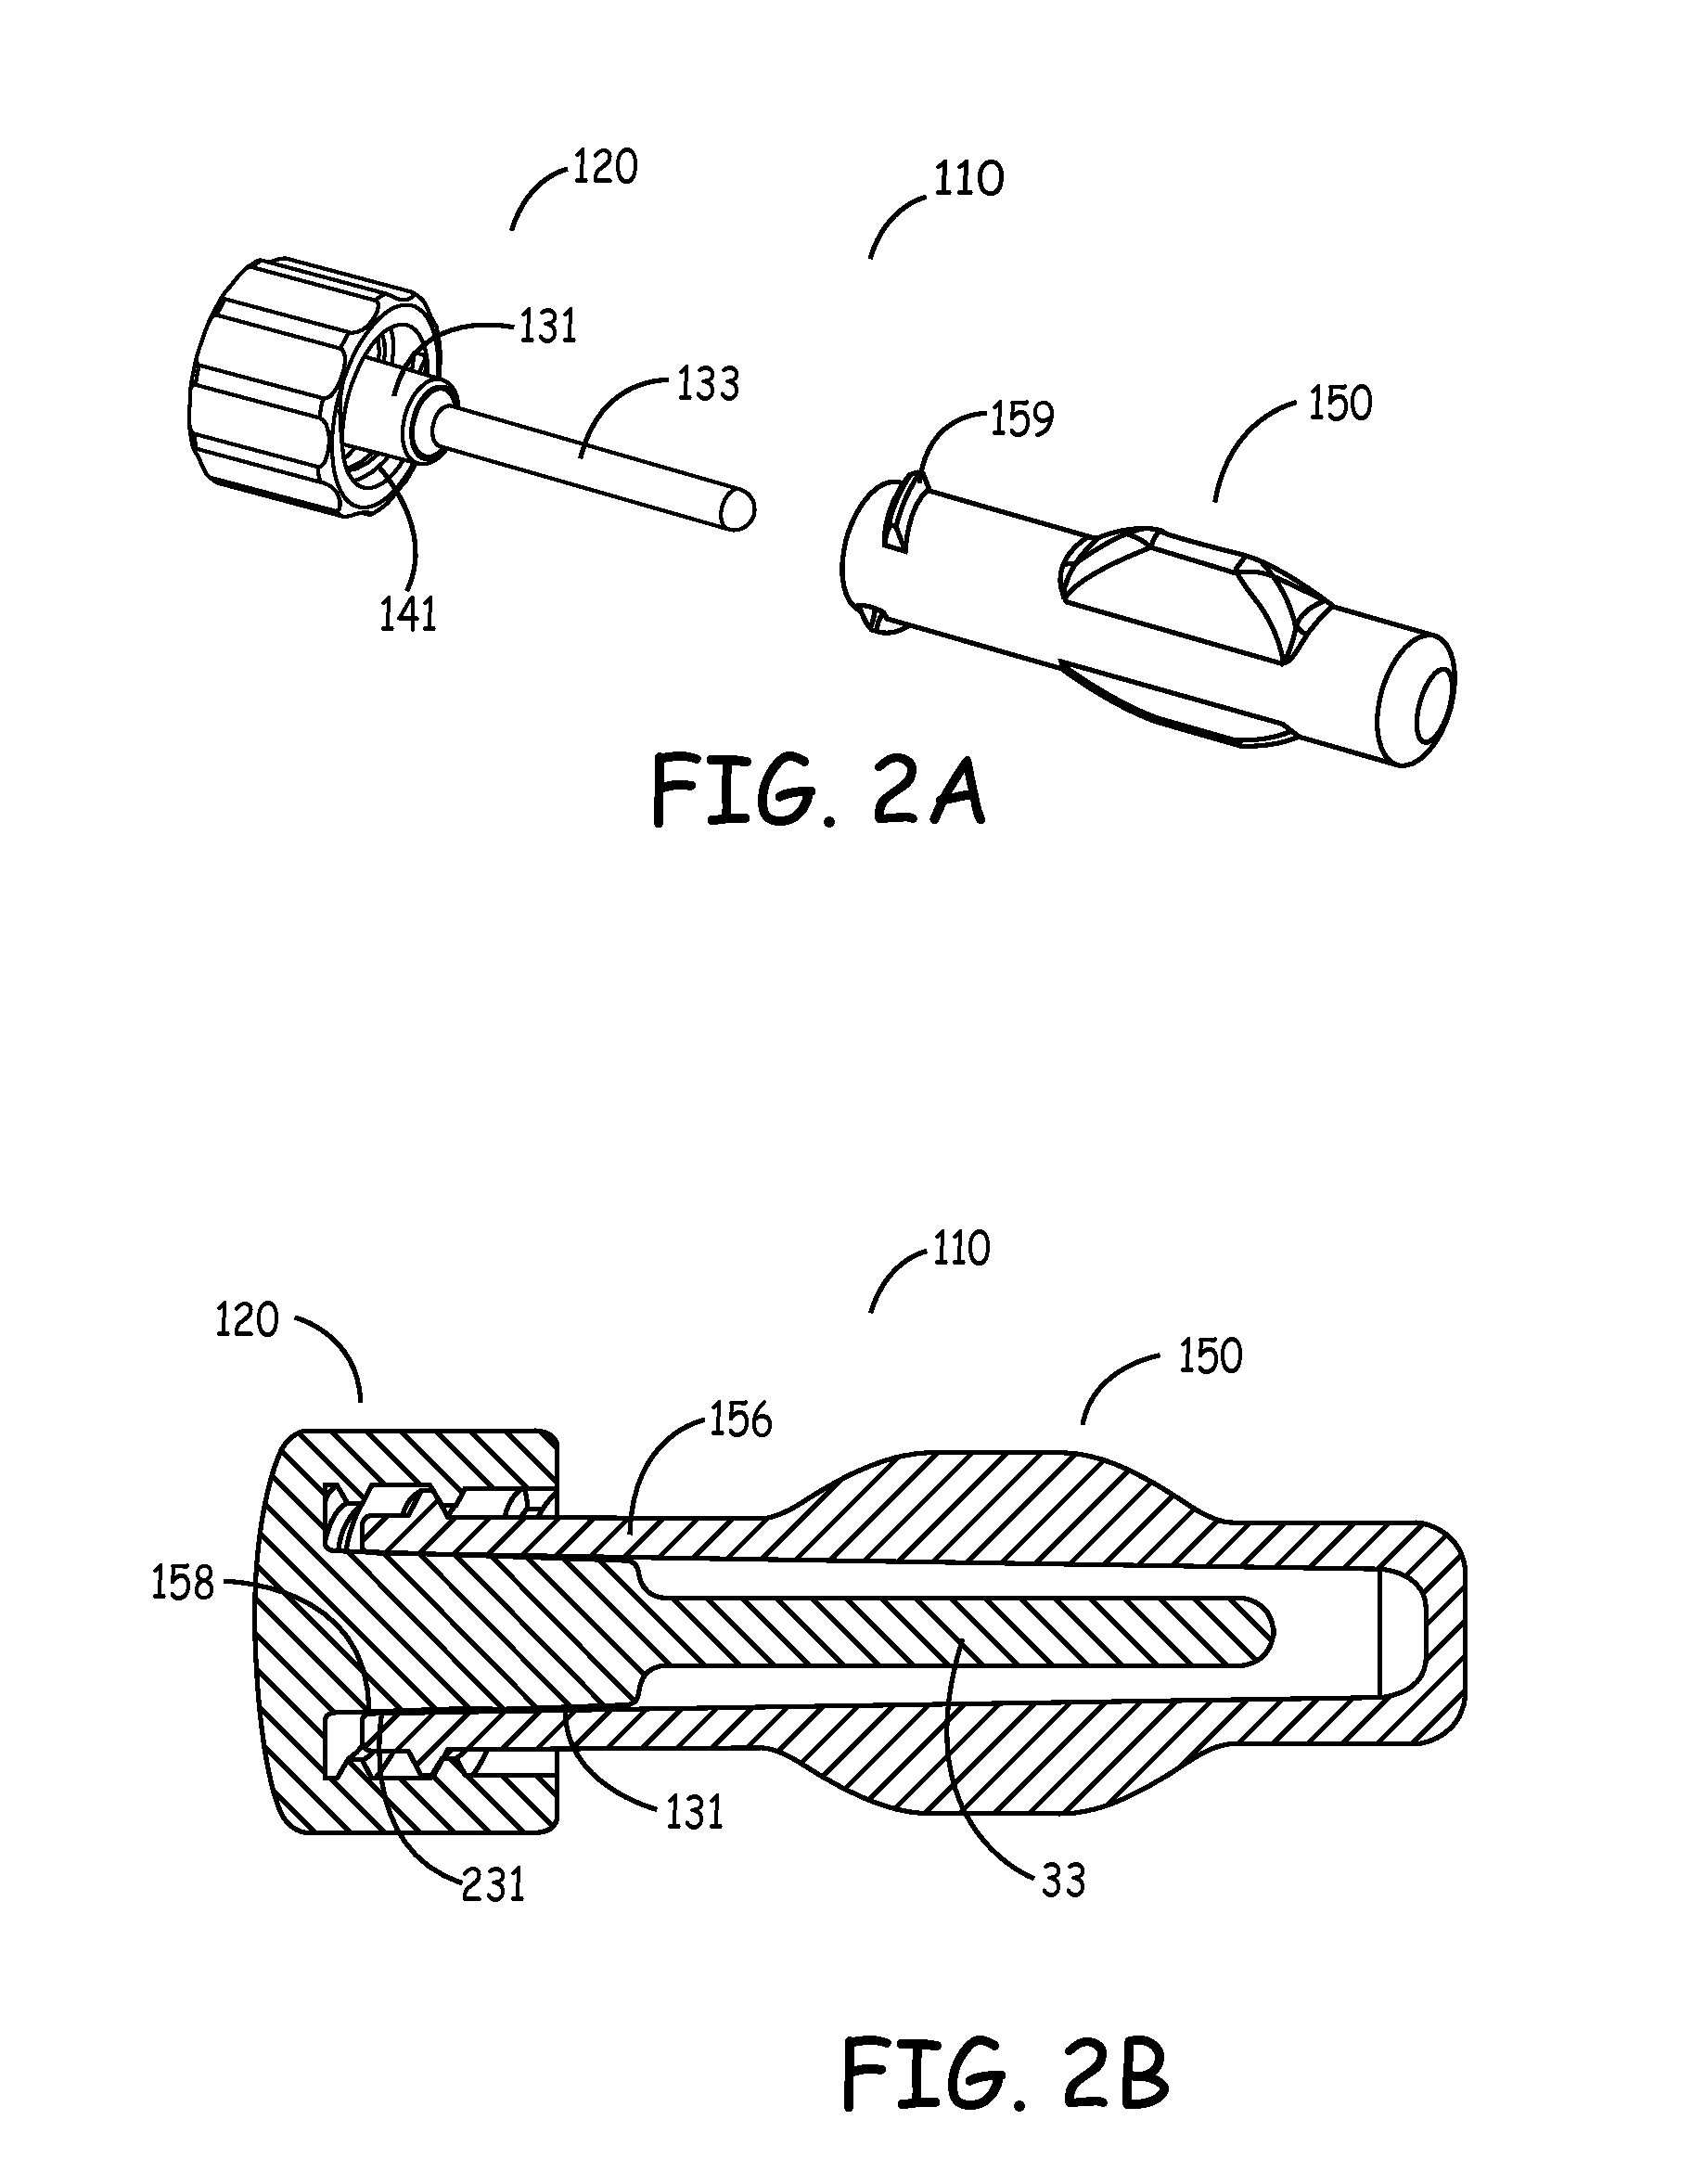 Method for delivery of antimicrobial to proximal end of catheter